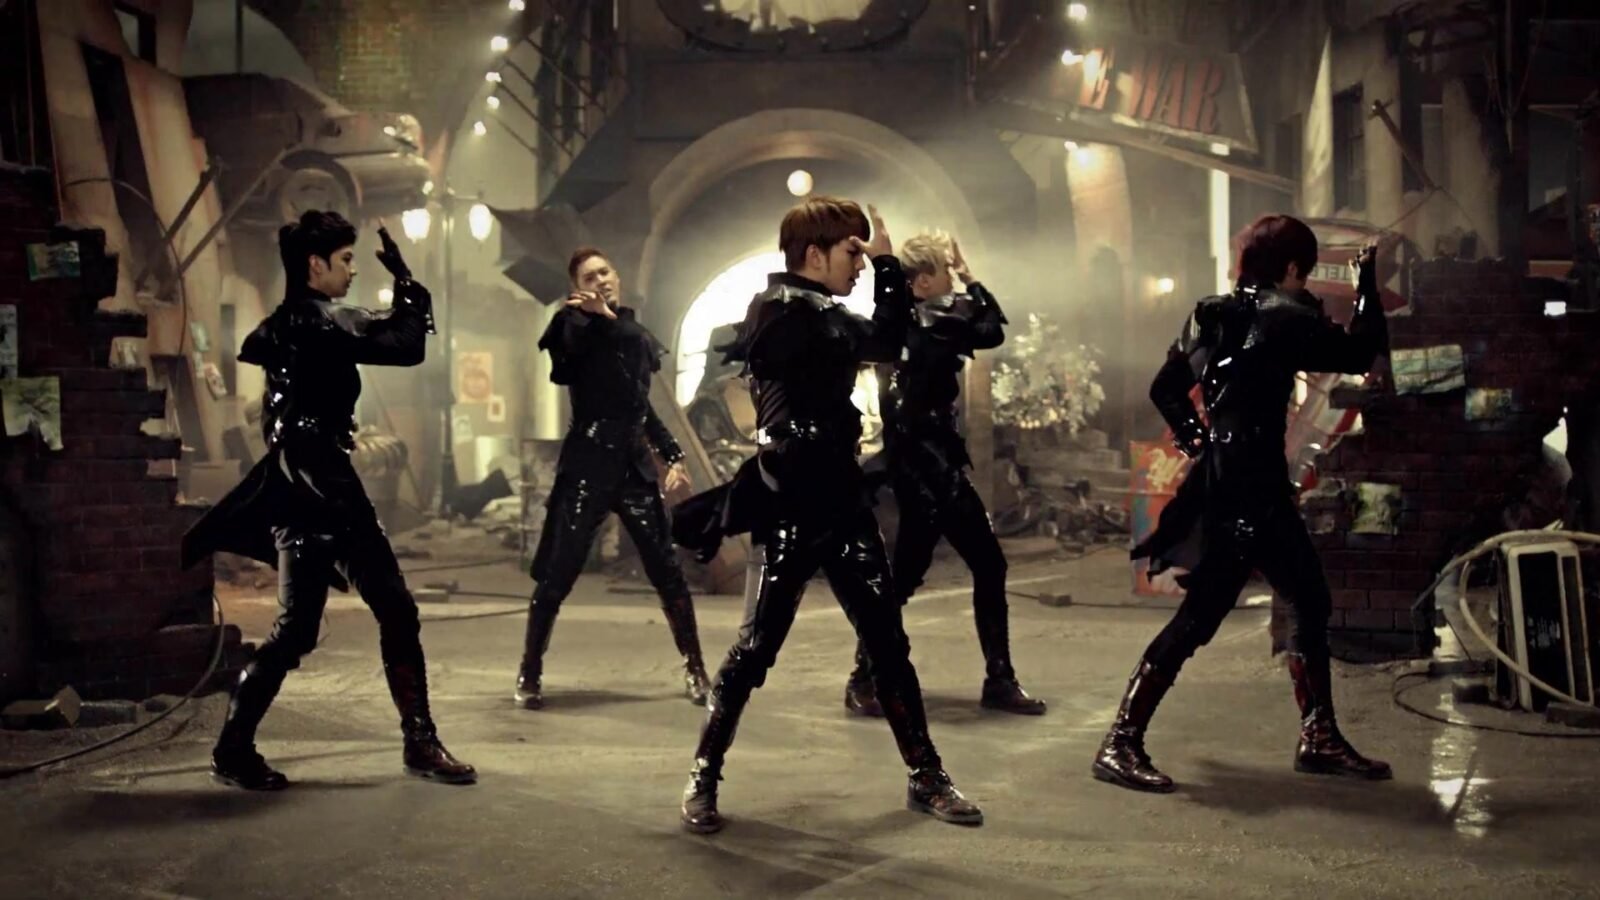 still from the MV for This is War by MBLAQ